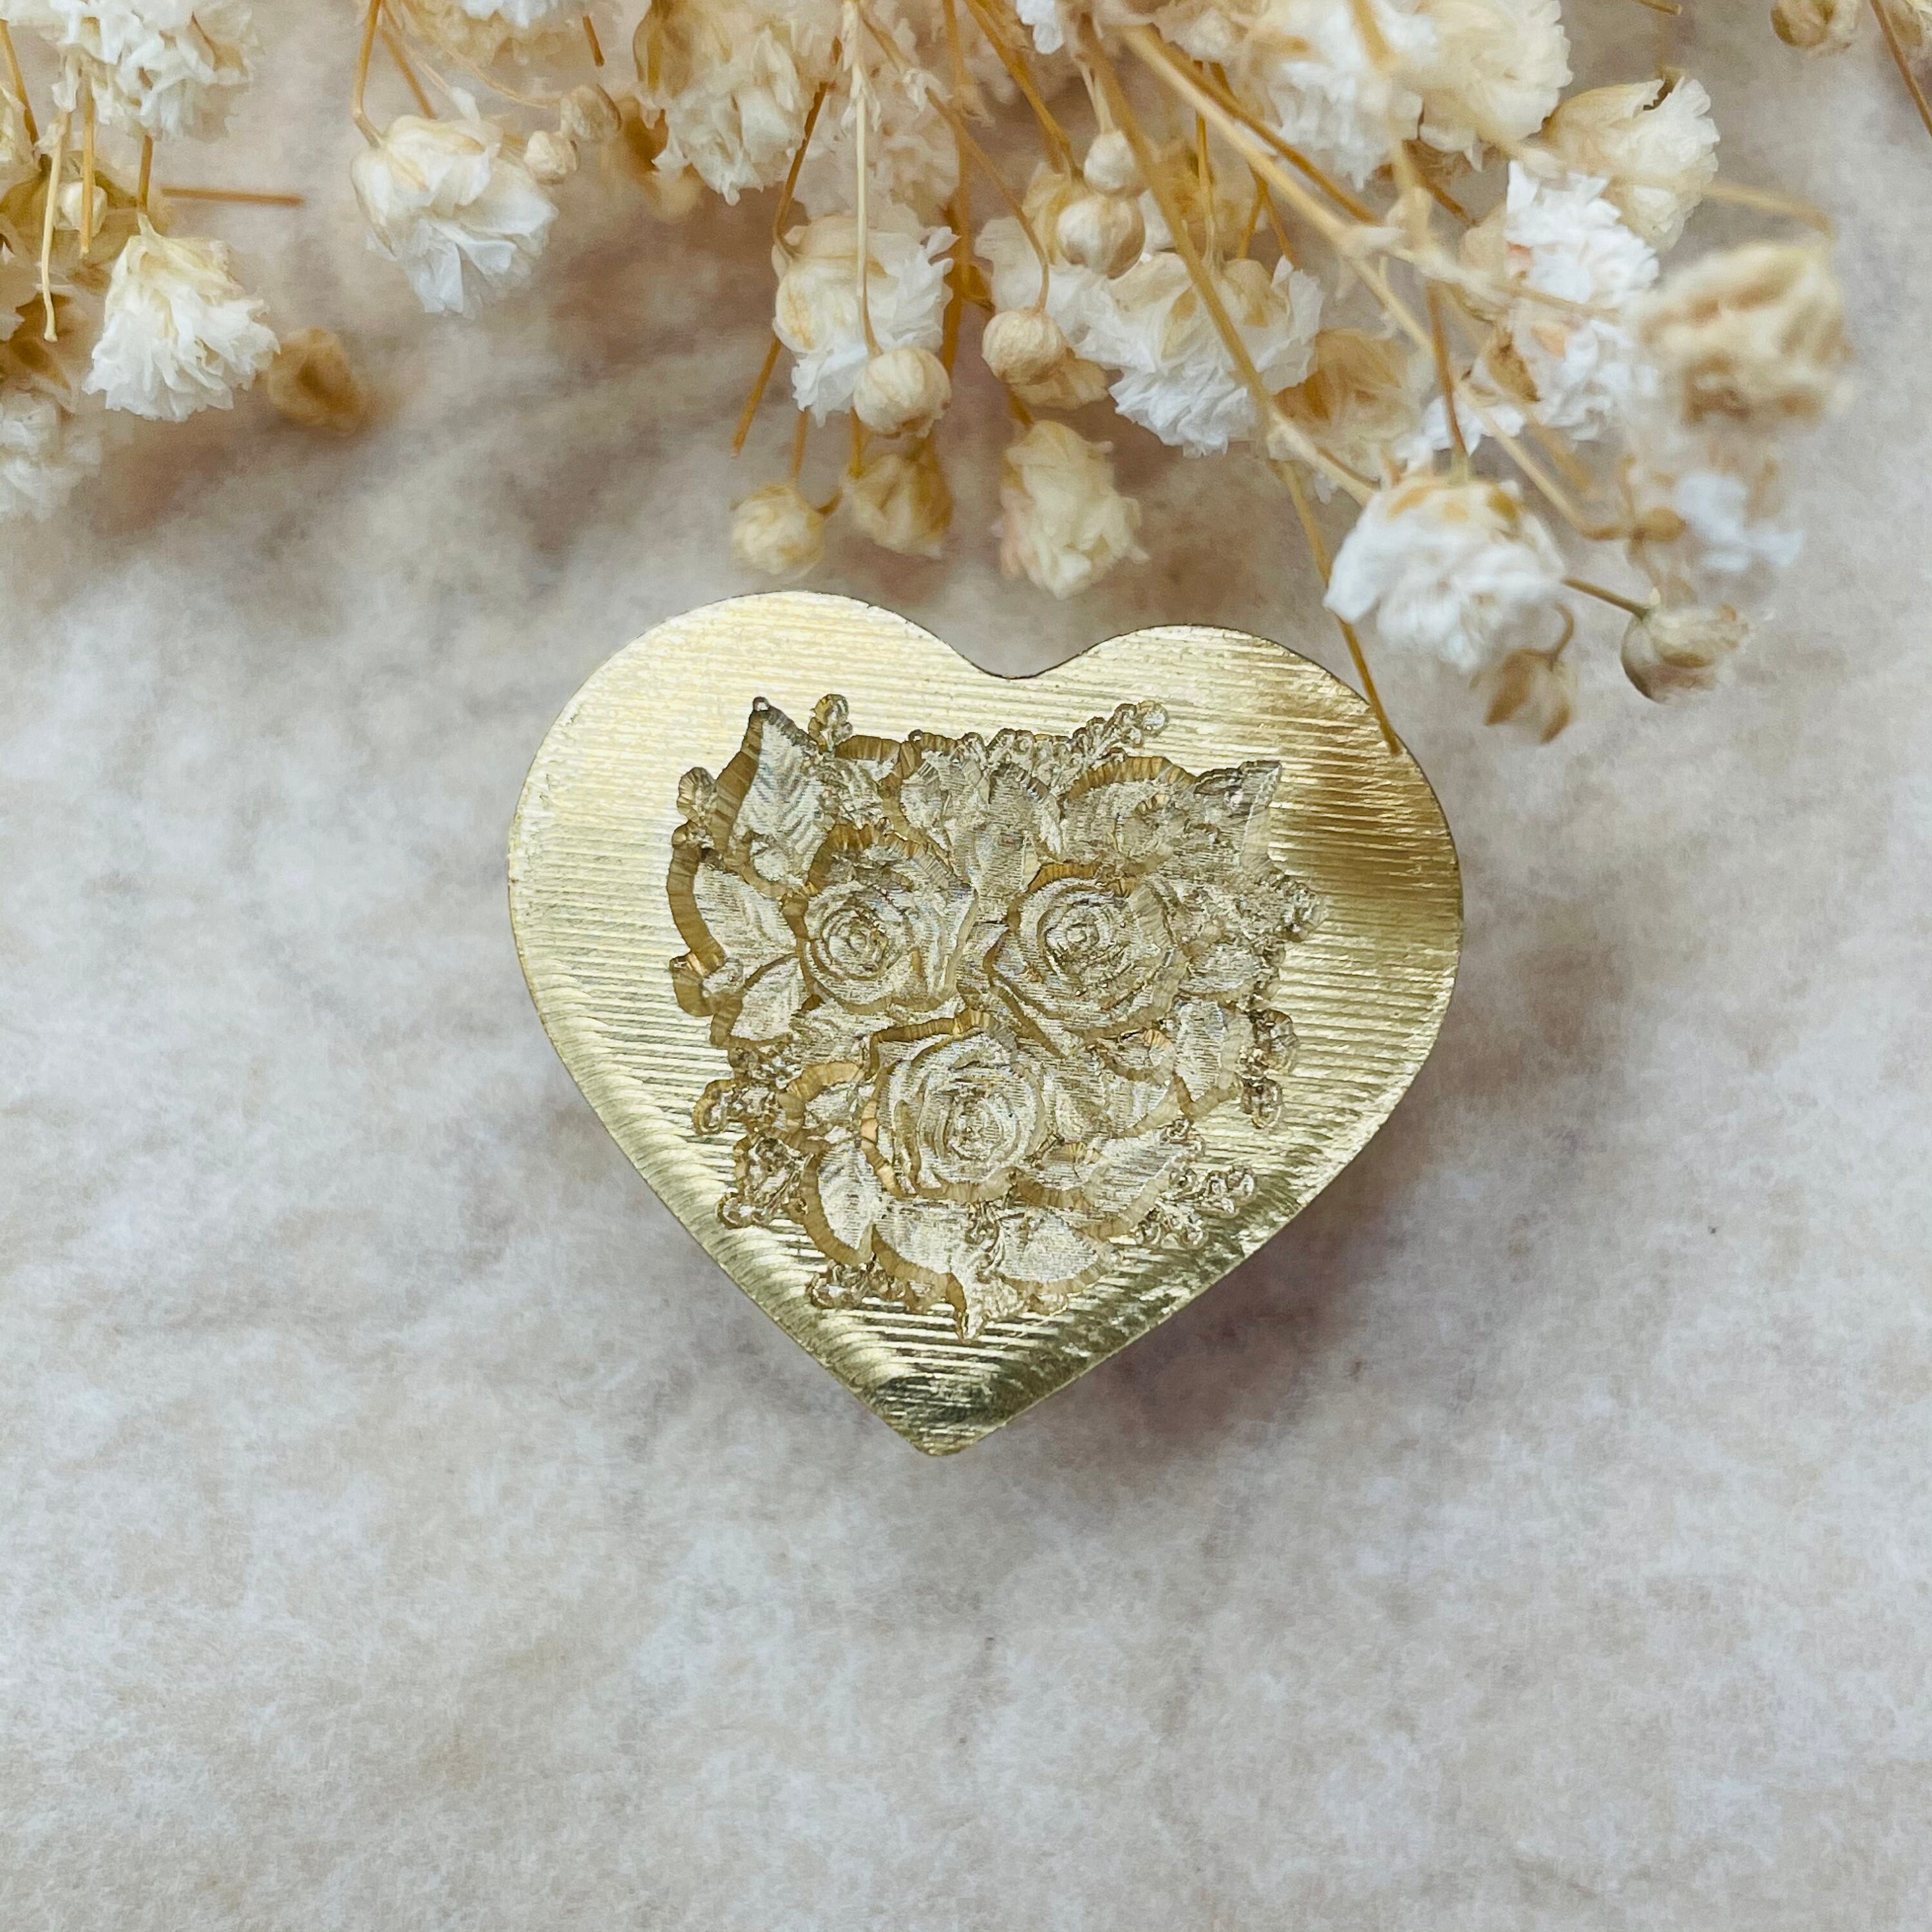 Custom Wax Seal Stamp - Heart Shaped 3D Relief Wax Seal Stamp